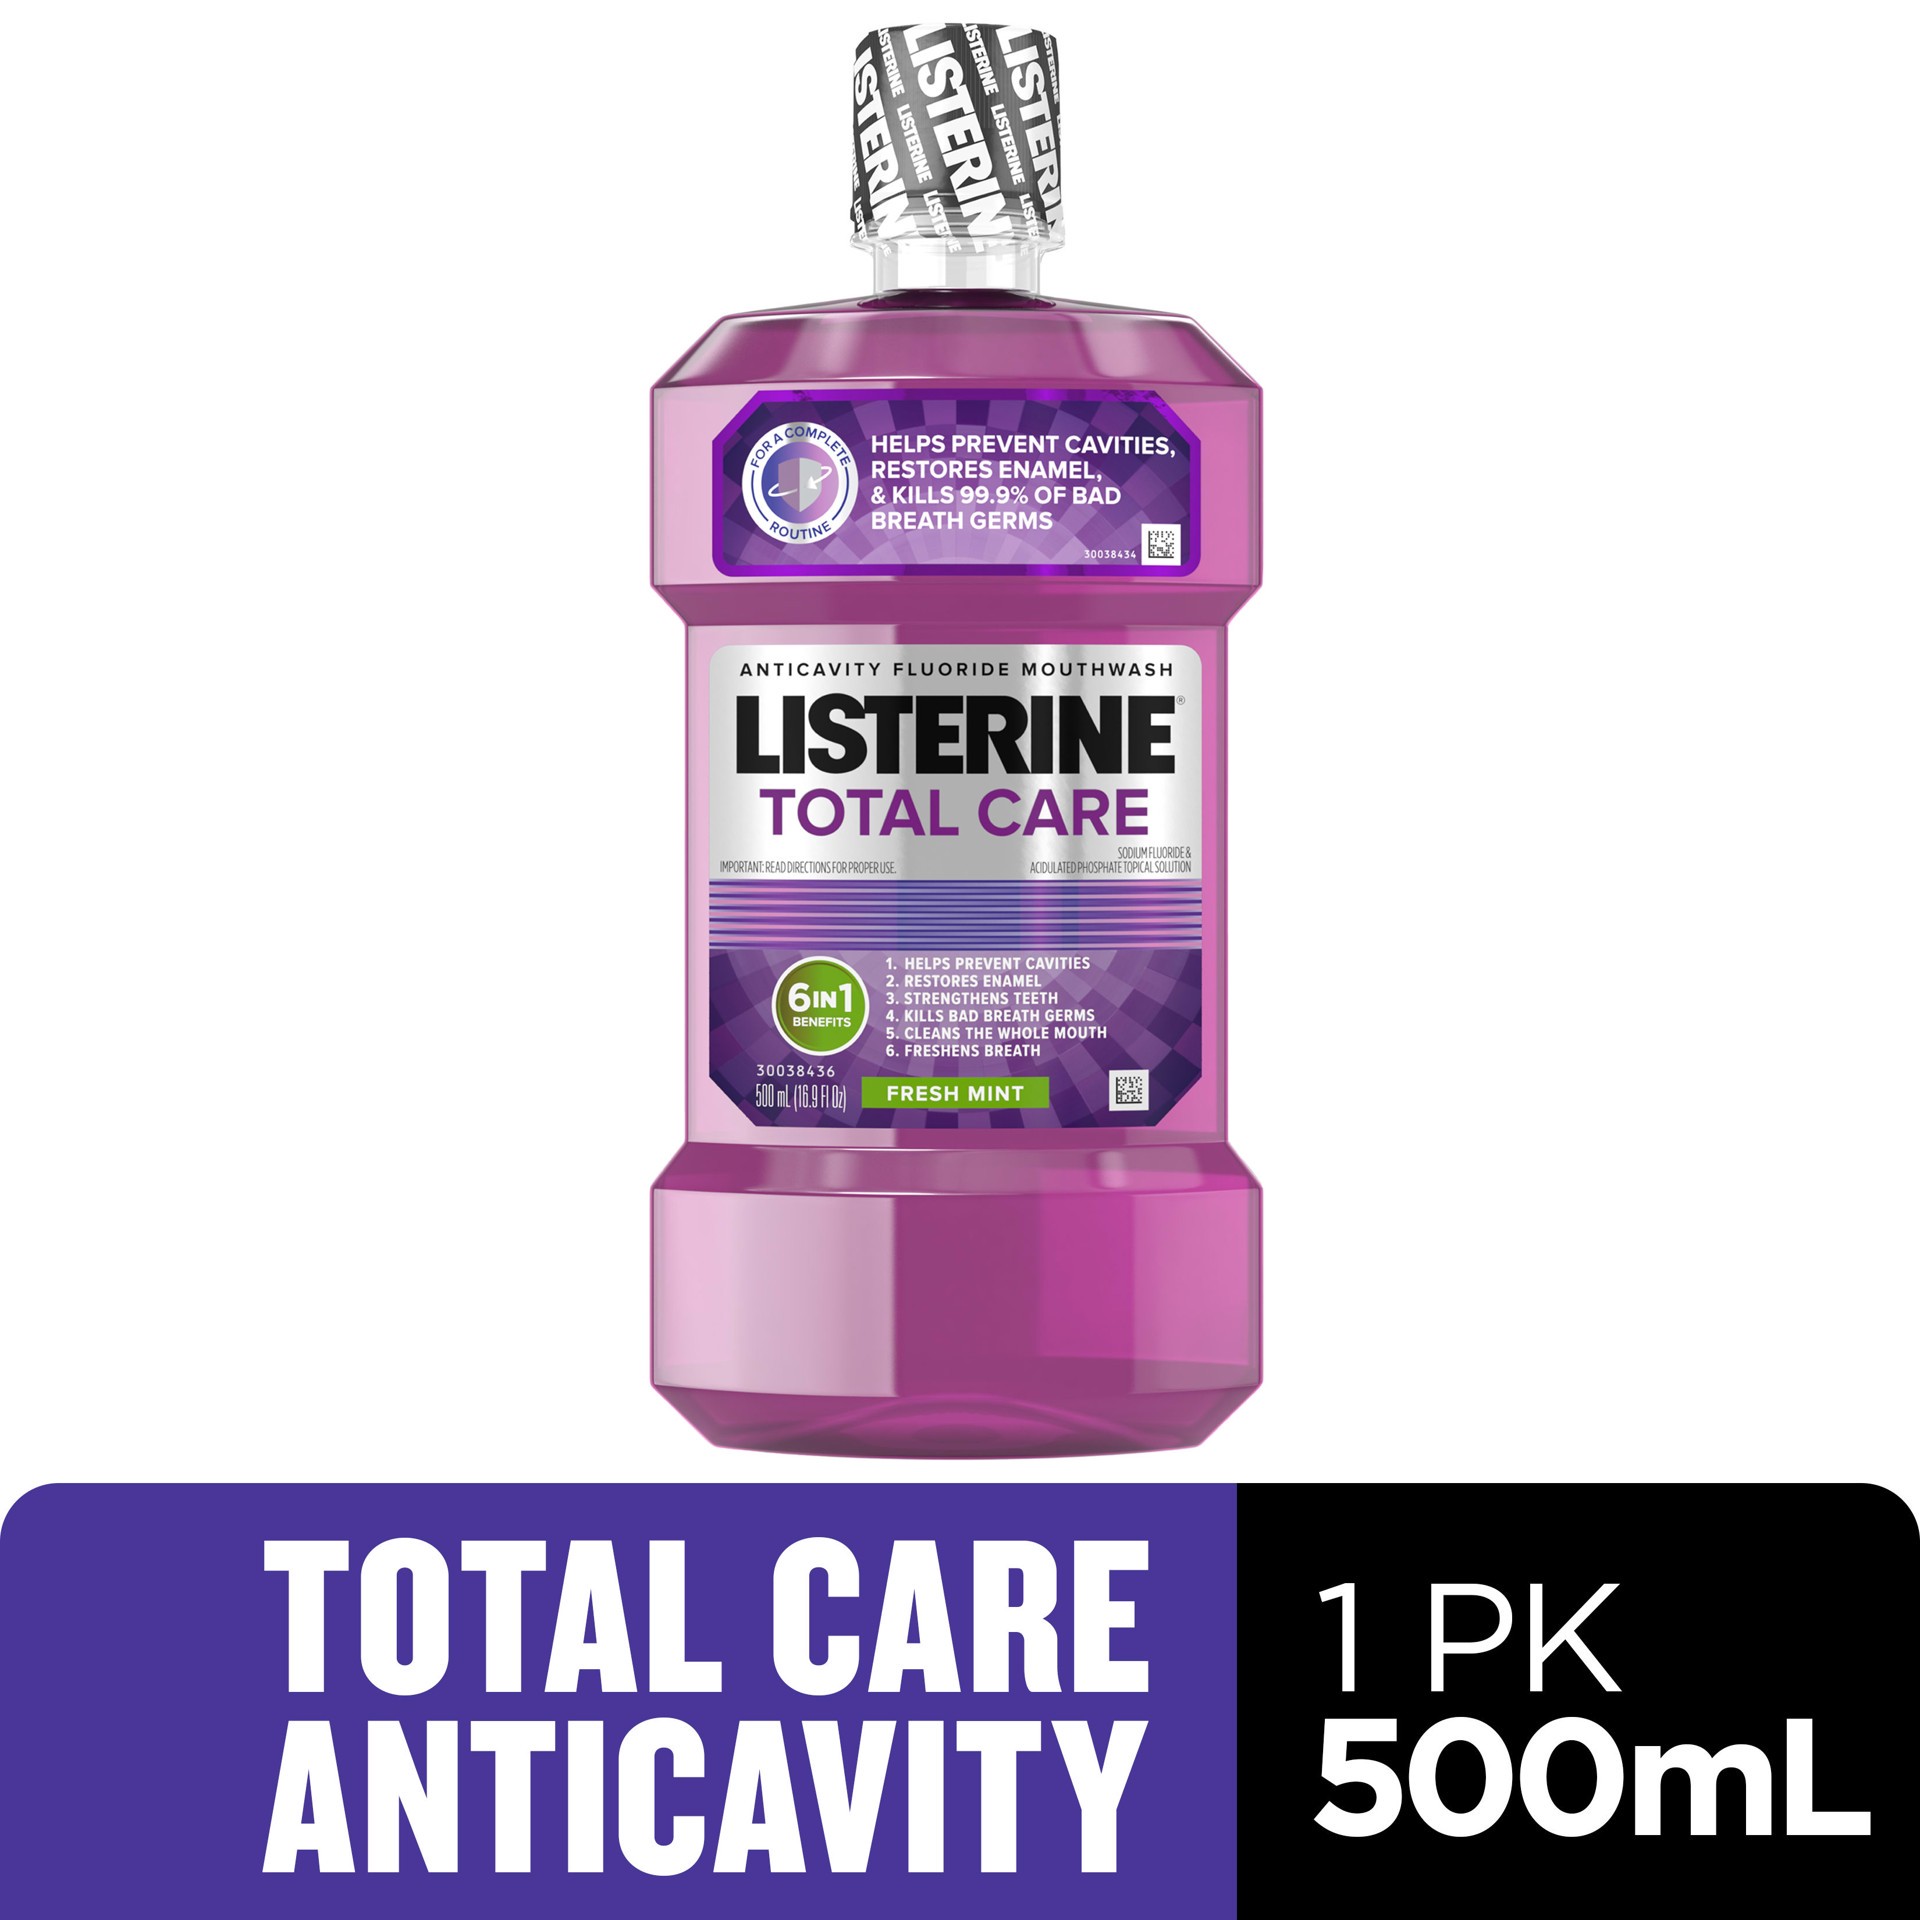 slide 1 of 6, Listerine Total Care Anticavity Fluoride Mouthwash, 6 Benefits in 1 Oral Rinse Helps Kill 99% of Bad Breath Germs, Prevents Cavities, Strengthens Enamel, ADA-Accepted, Fresh Mint, 16.9 fl oz